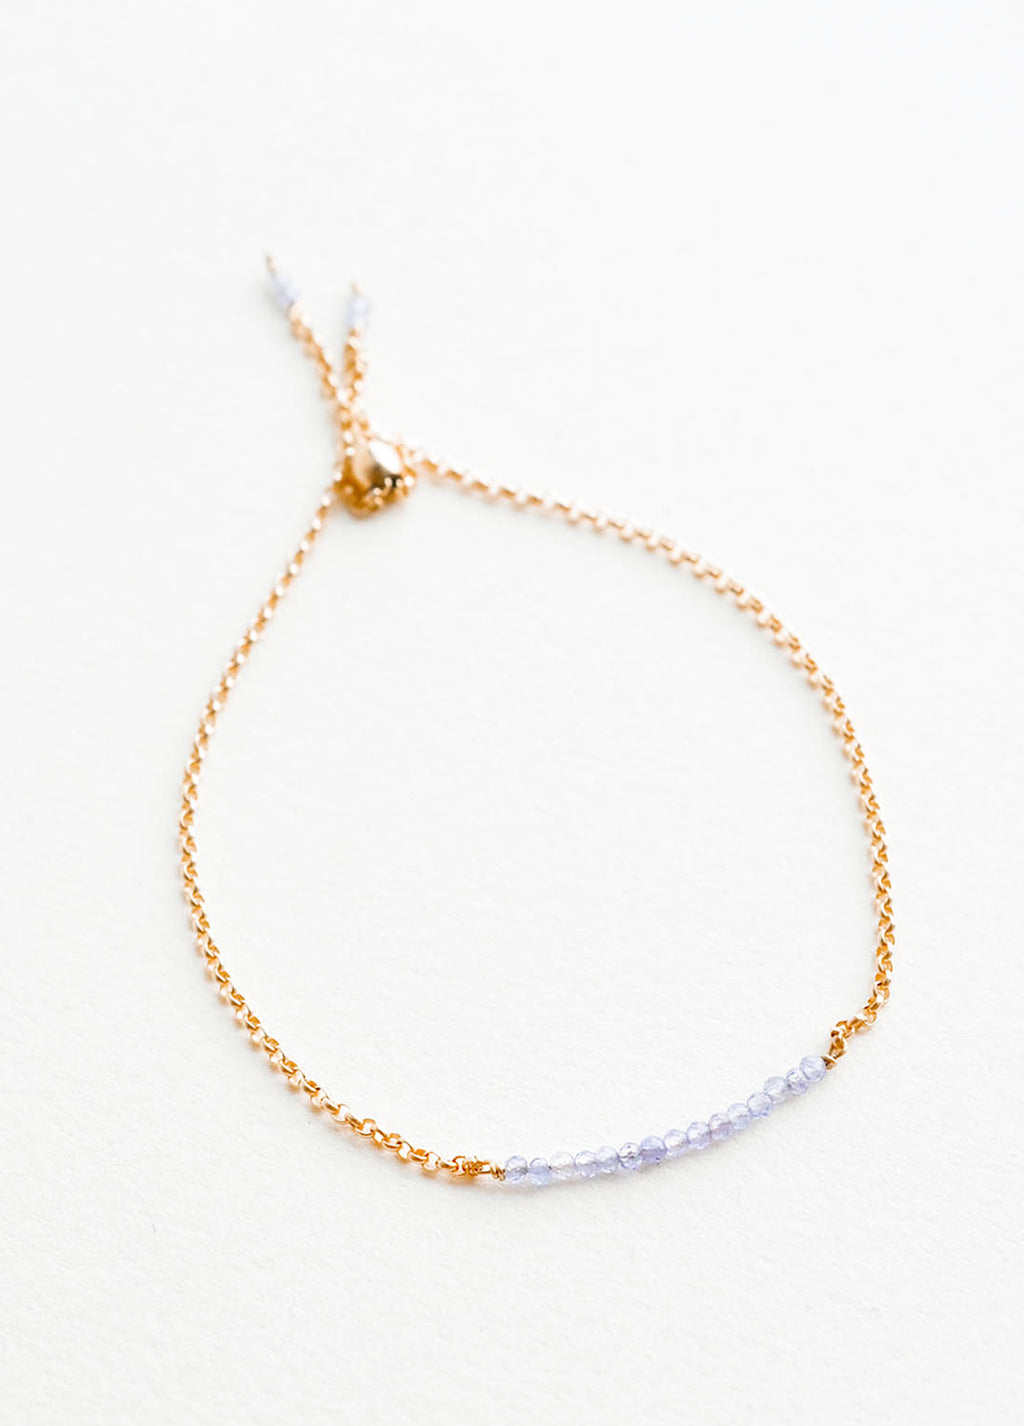 Tanzanite: A delicate gold chain bracelet featuring a row of miniature light blue gemstones.